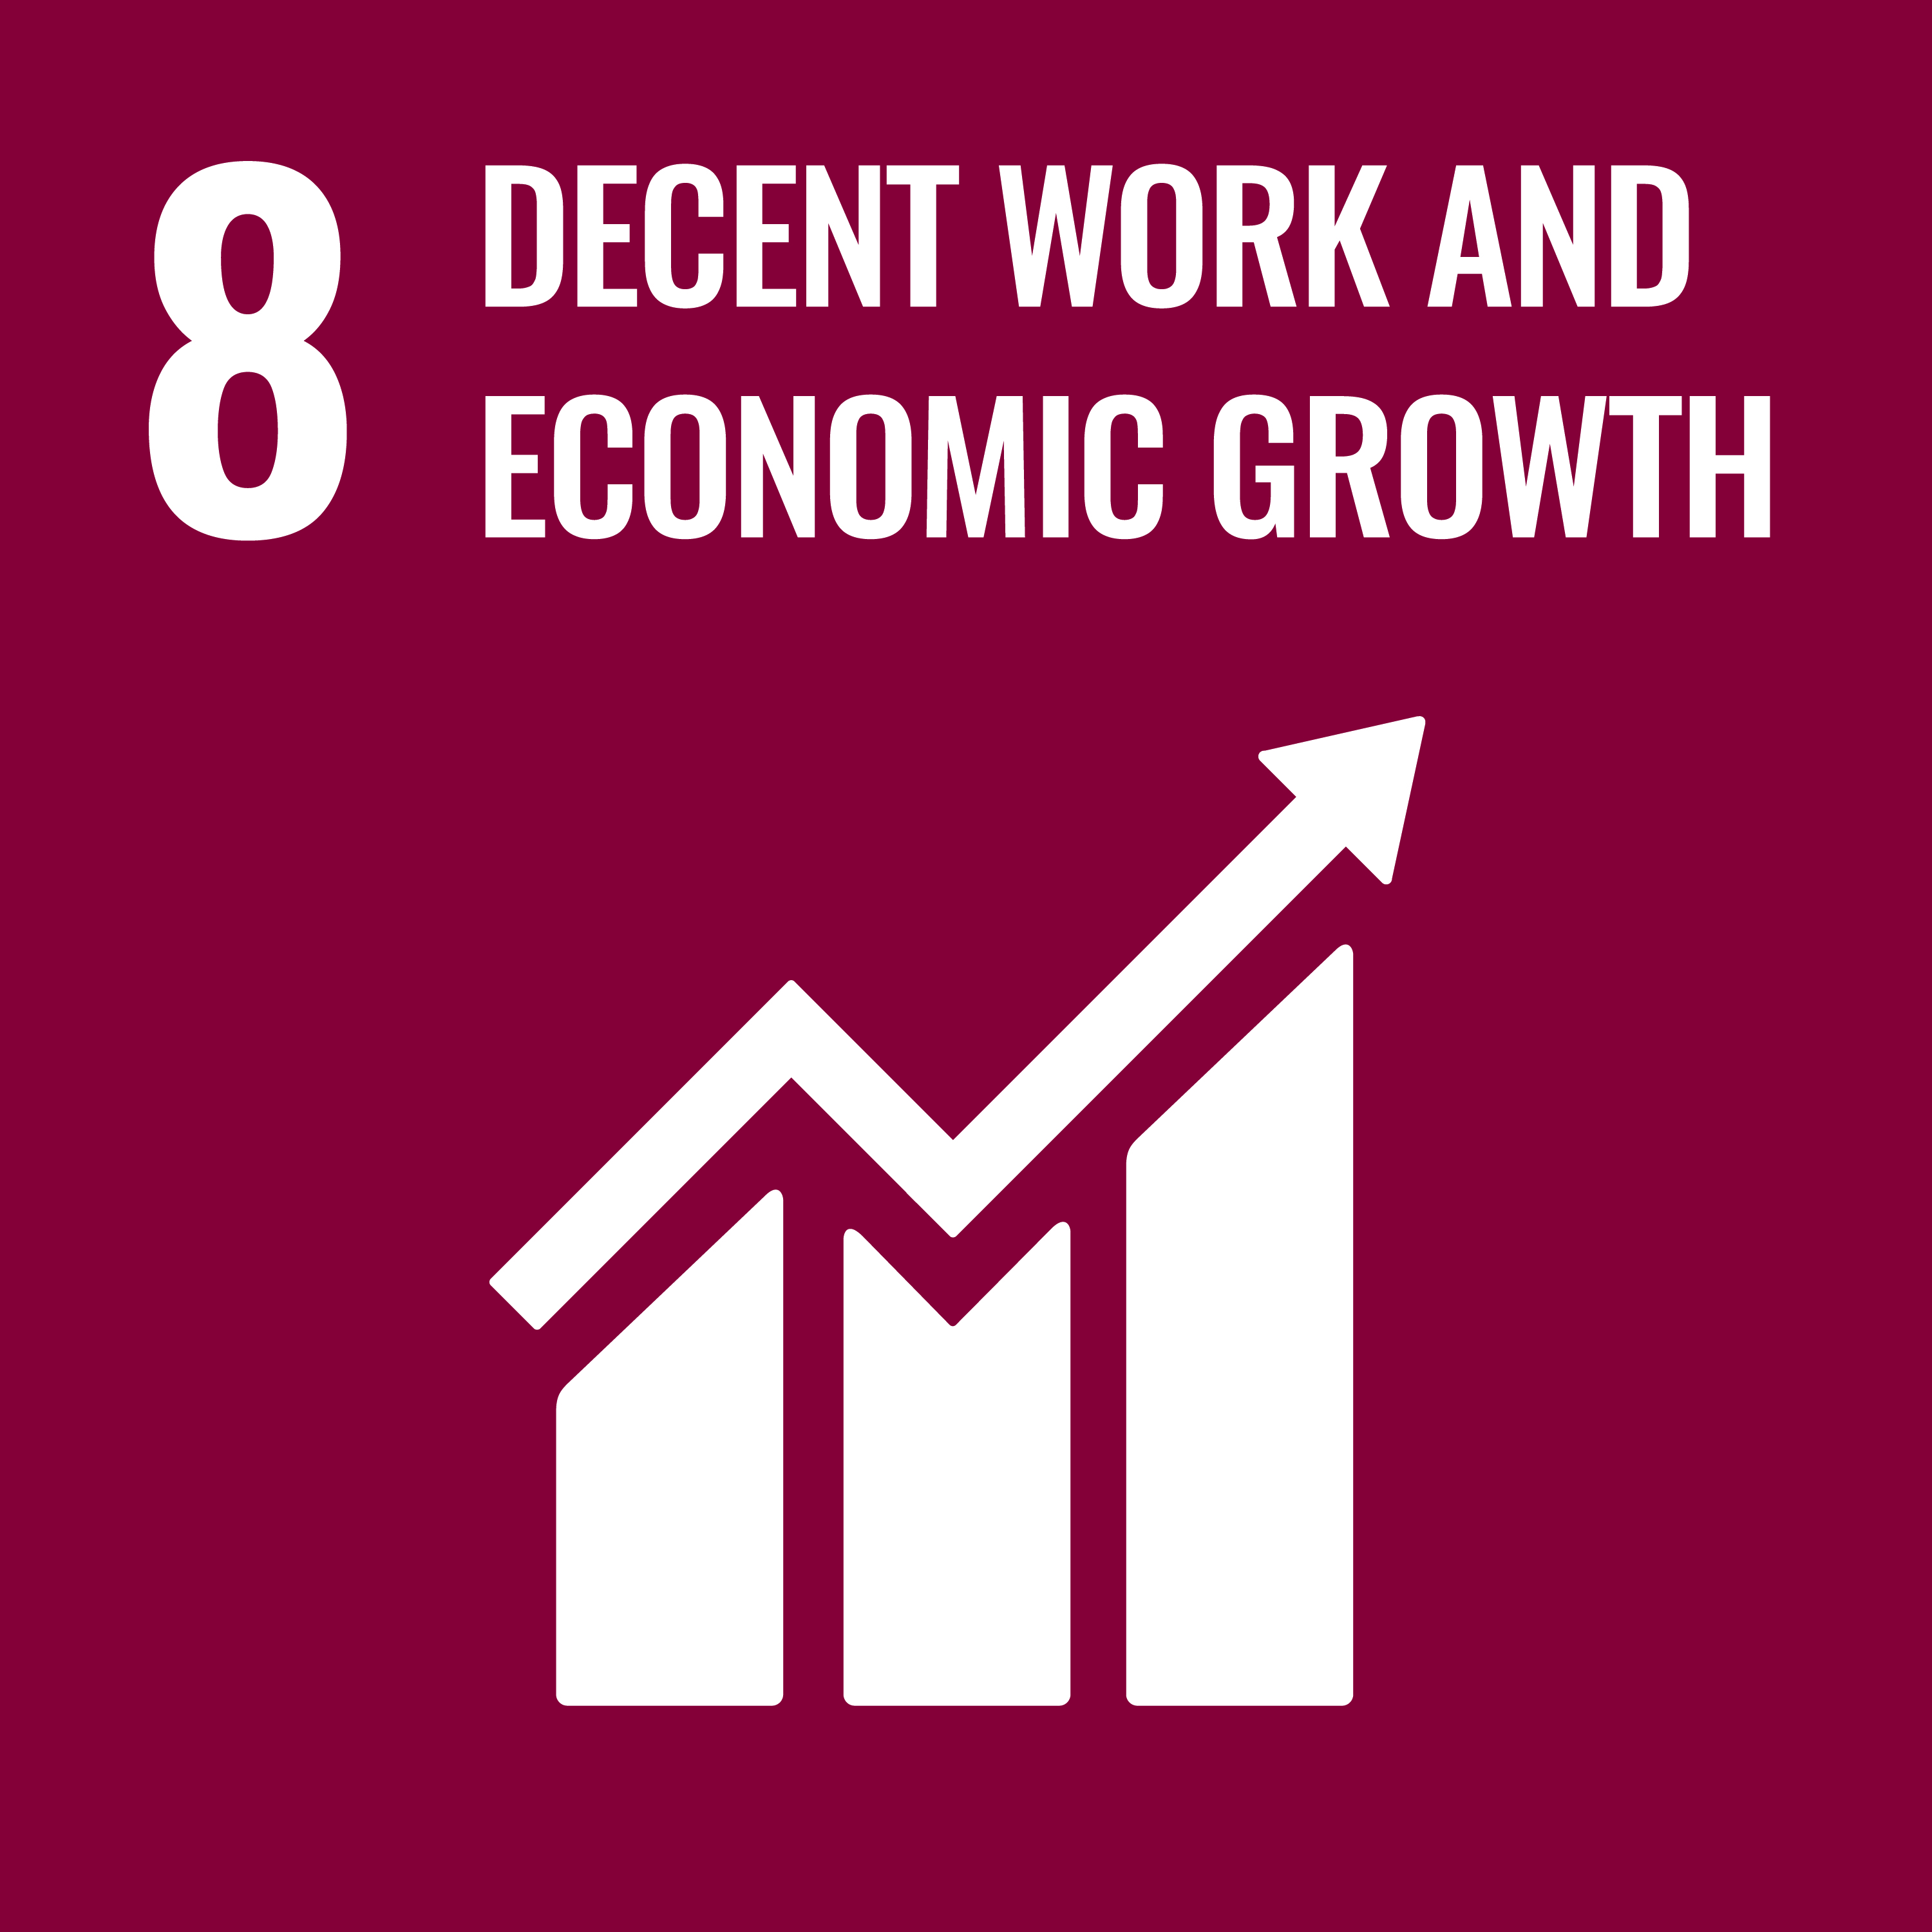 A red icon depicting a graph and the text "8: Decent work and economic growth"